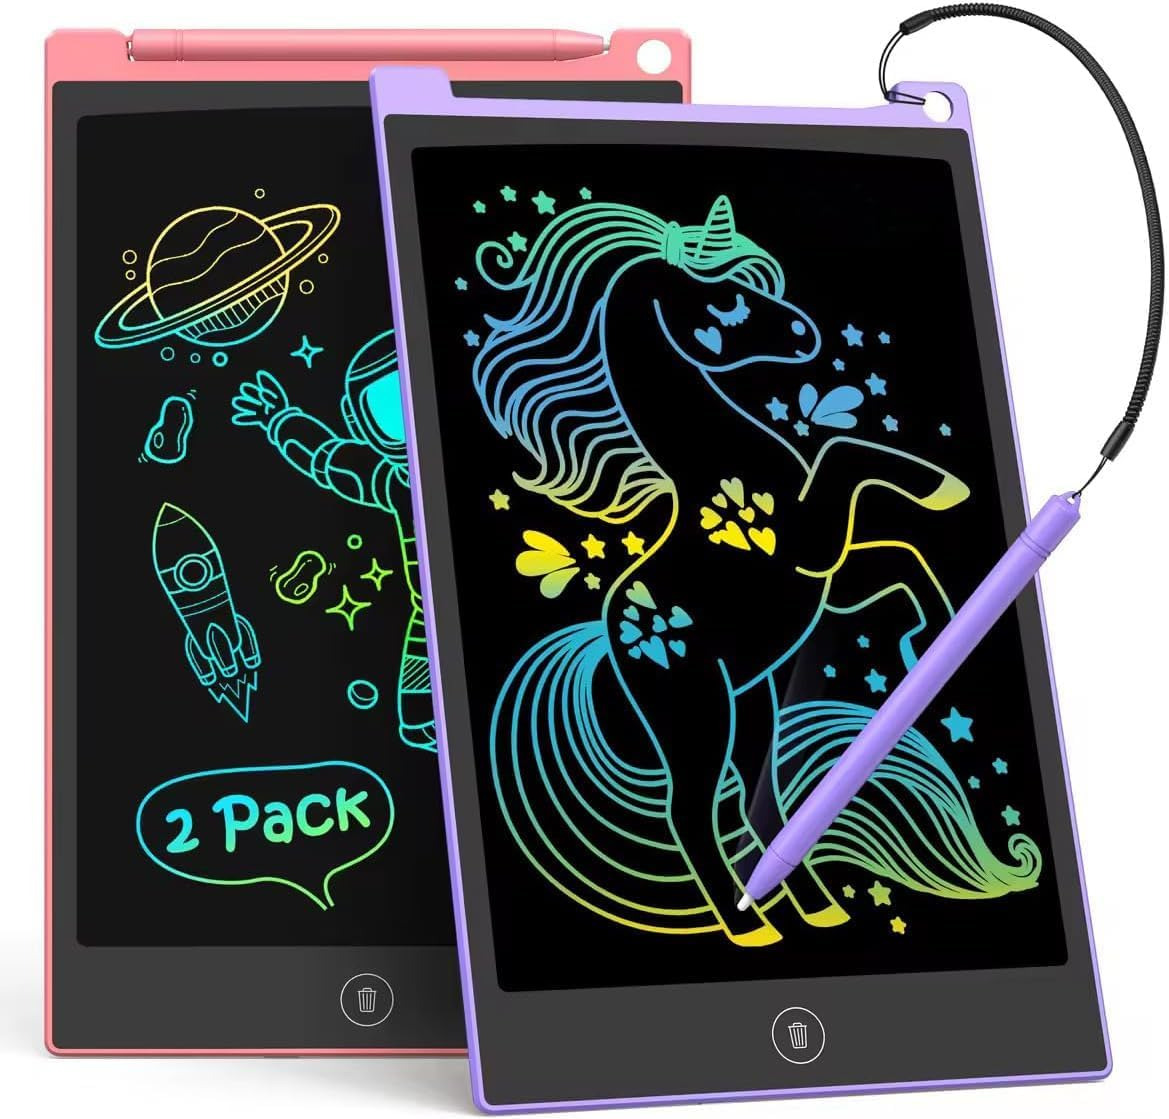 2 Pack 10 Inch LCD Writing Tablet, Colorful Doodle Board Electronic Drawing Pads